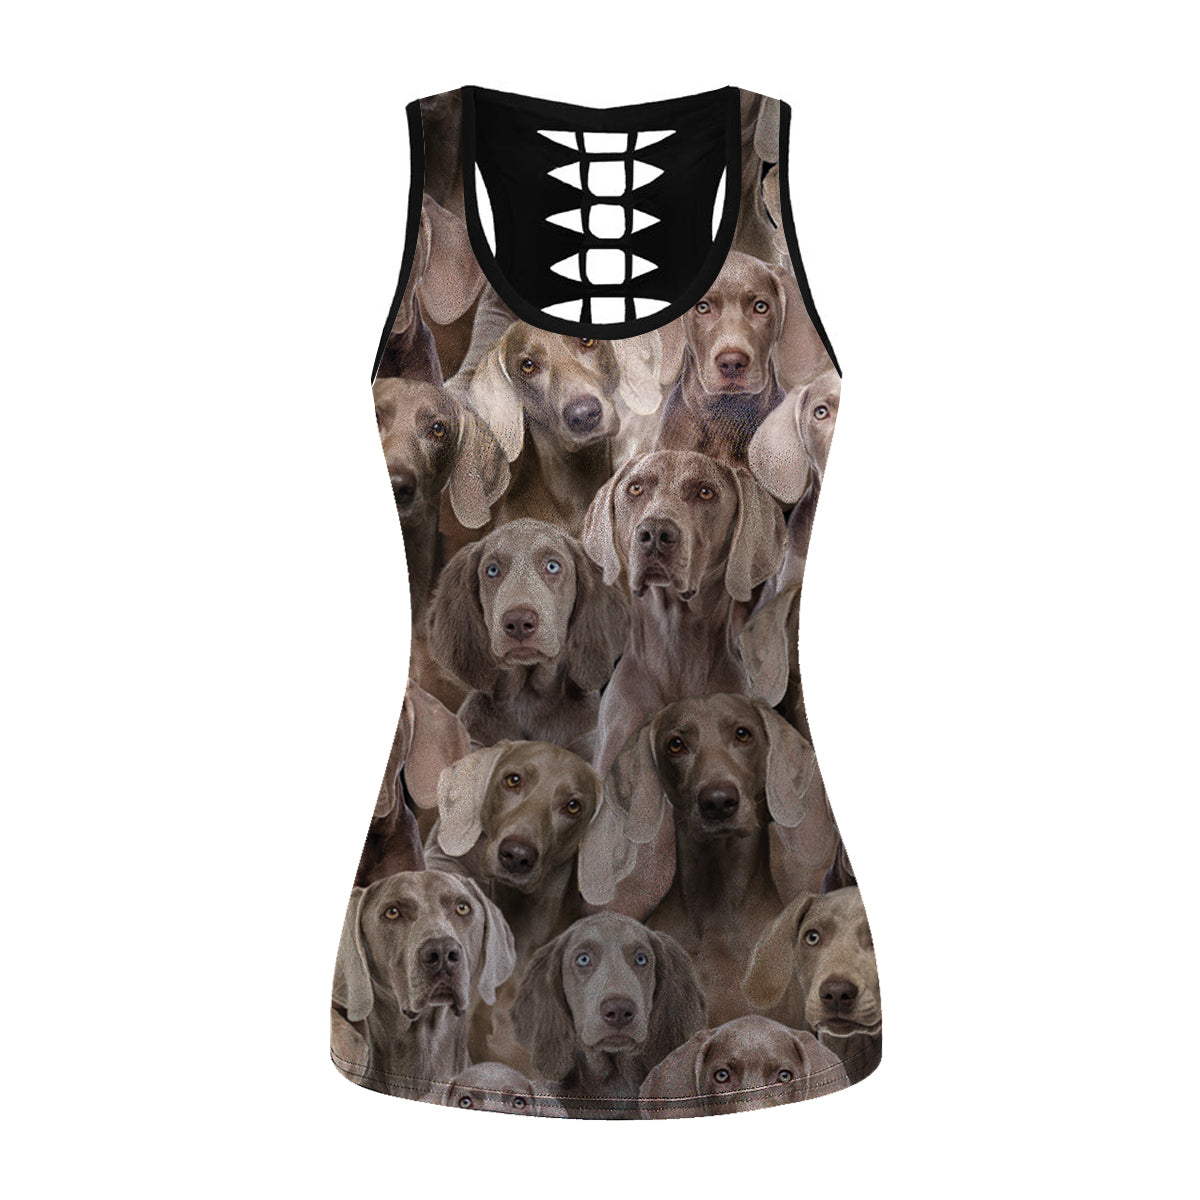 You Will Have A Bunch Of Weimaraners - Hollow Tank Top V1